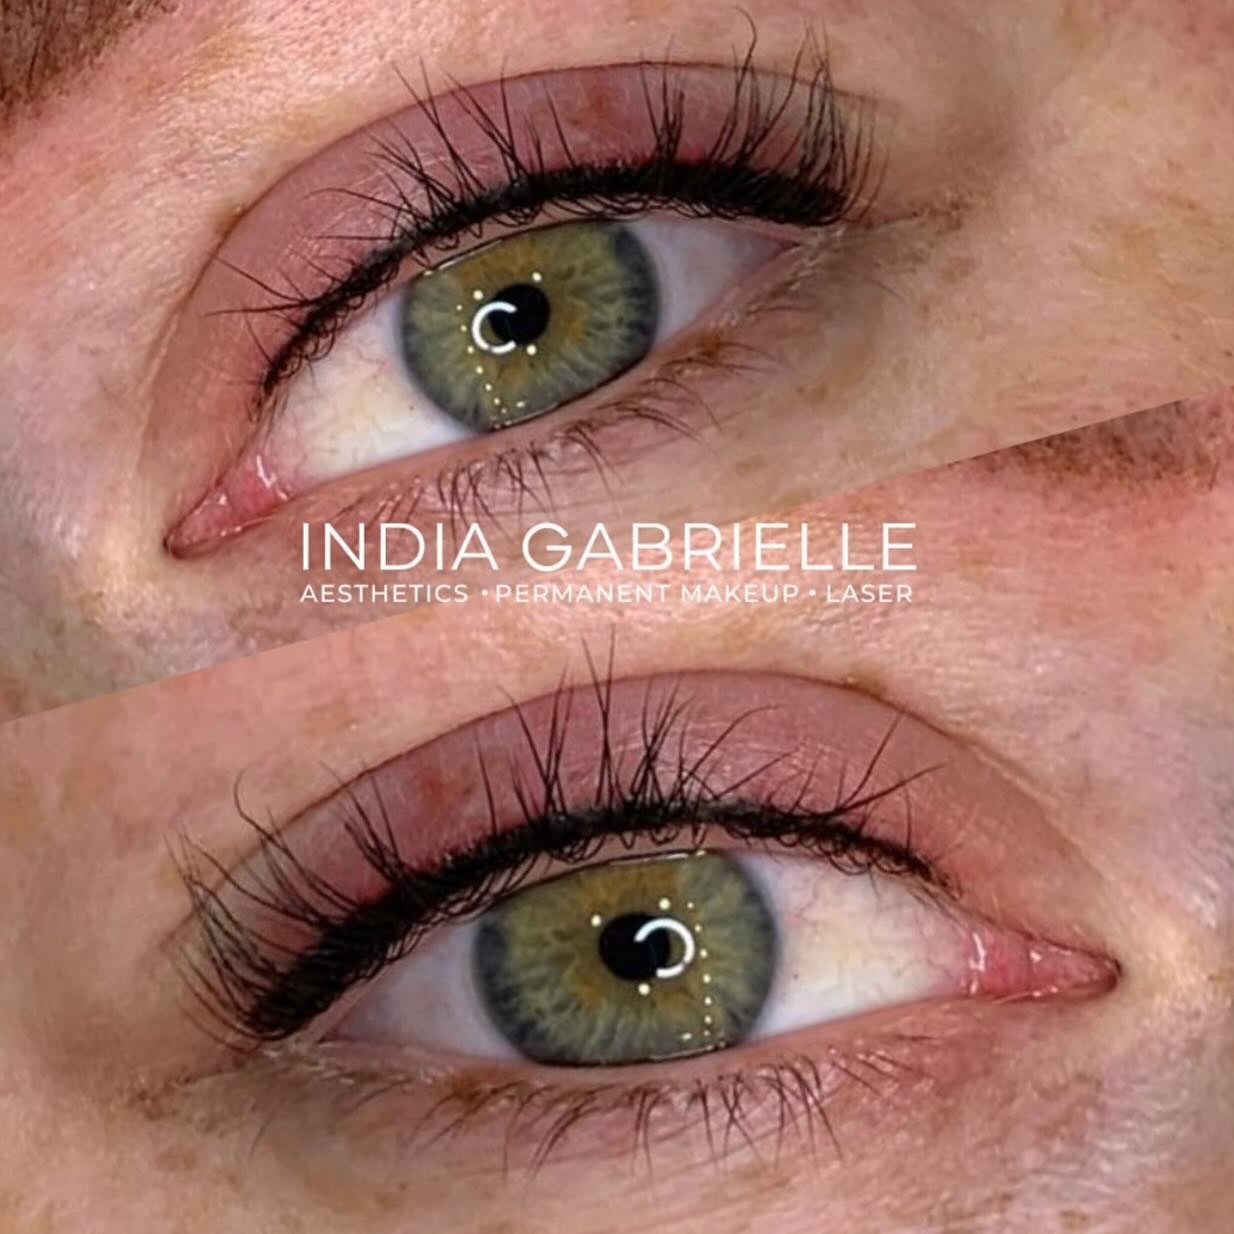 Permanent pigment implanted through the lash line (at the base of each eyelash) really brings out the colour of your eyes and makes them look so much brighter 😍
 
This technique is a Permanent Eyelash Enhancement.
 
My client&rsquo;s eyes are more d